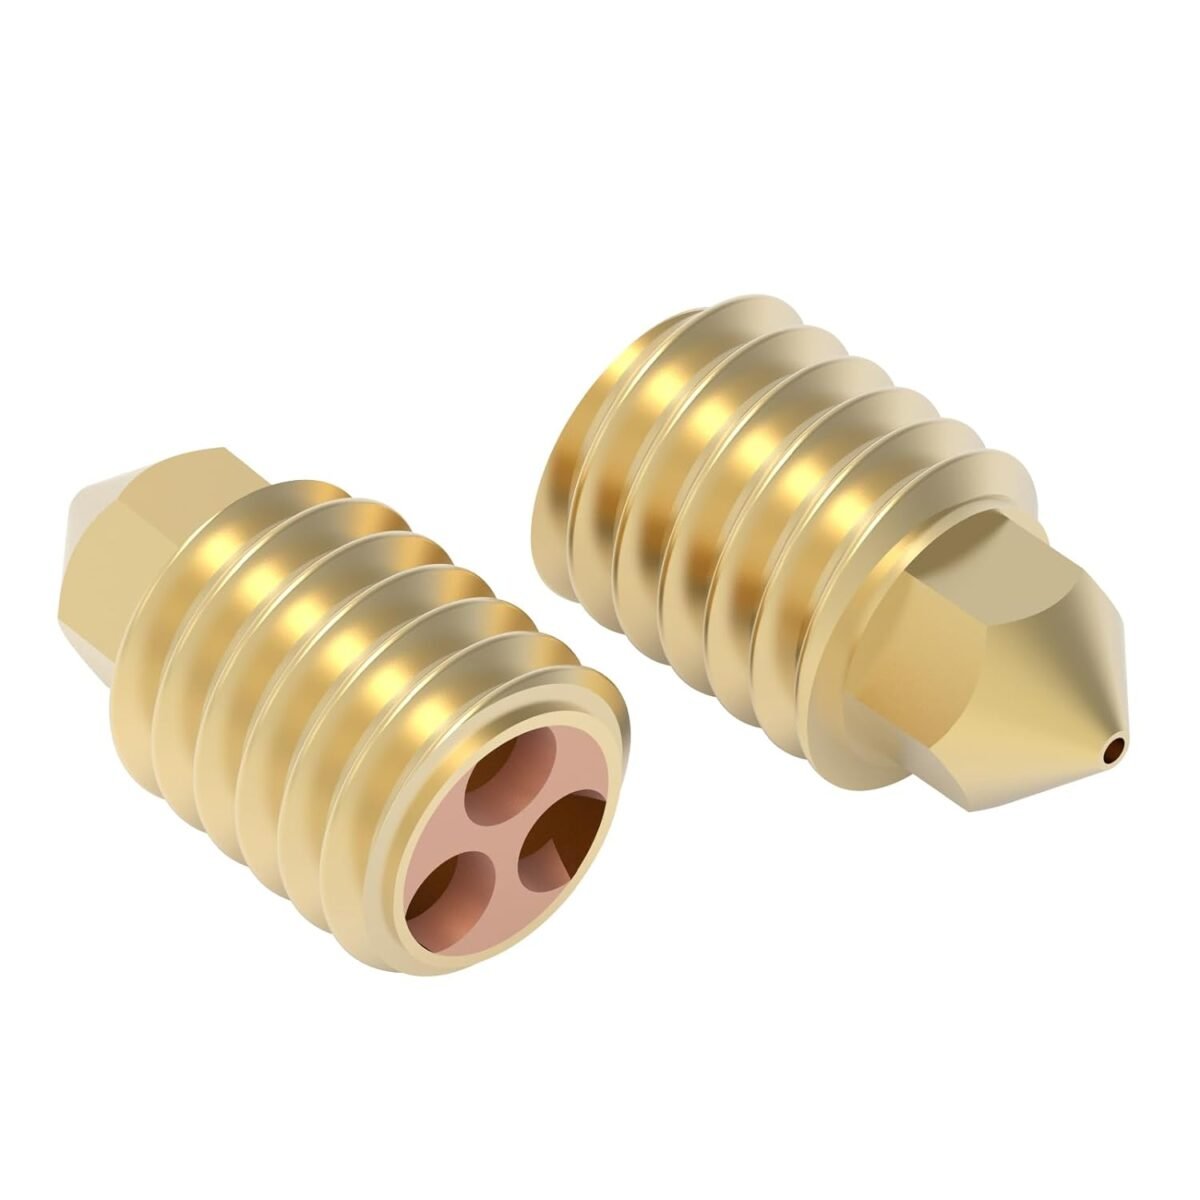 Bambu lab cht nozzle size 0.4mm brass nozzle for Bambu Lab X1 and P1P for 1.75 Filament 6